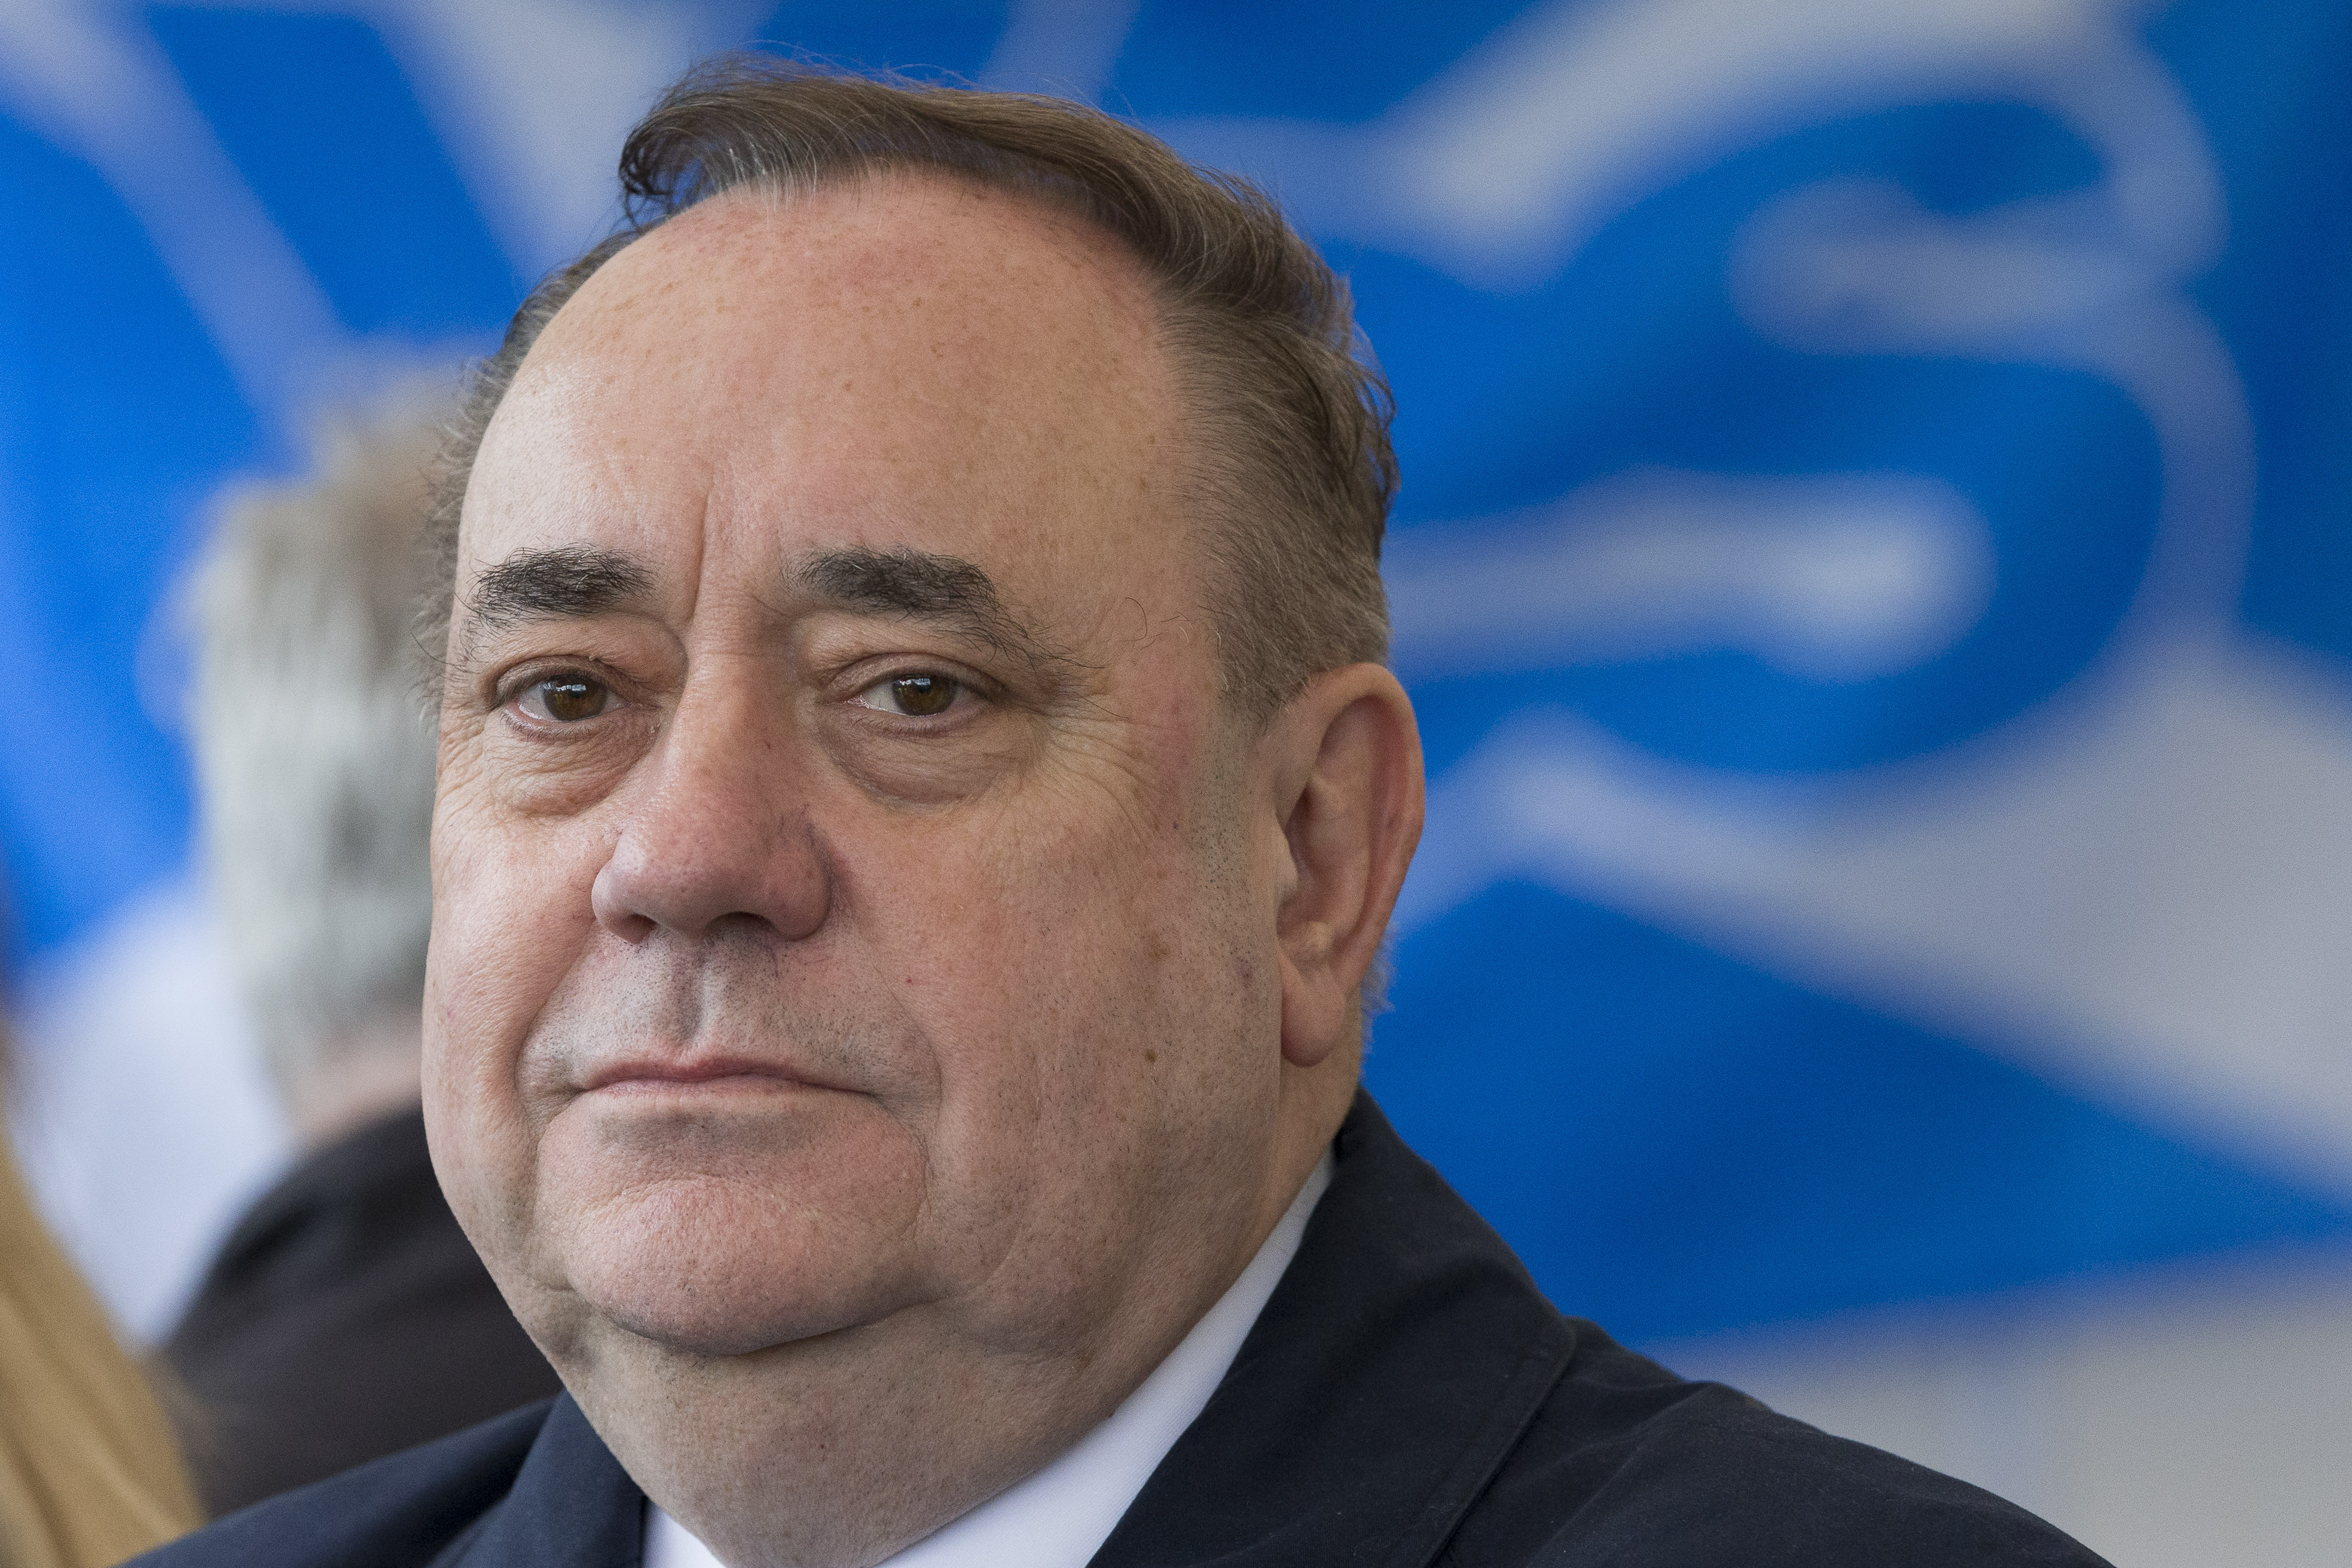 Alex Salmond appeared before the inquiry into intergovernmental relations in the UK earlier this year.